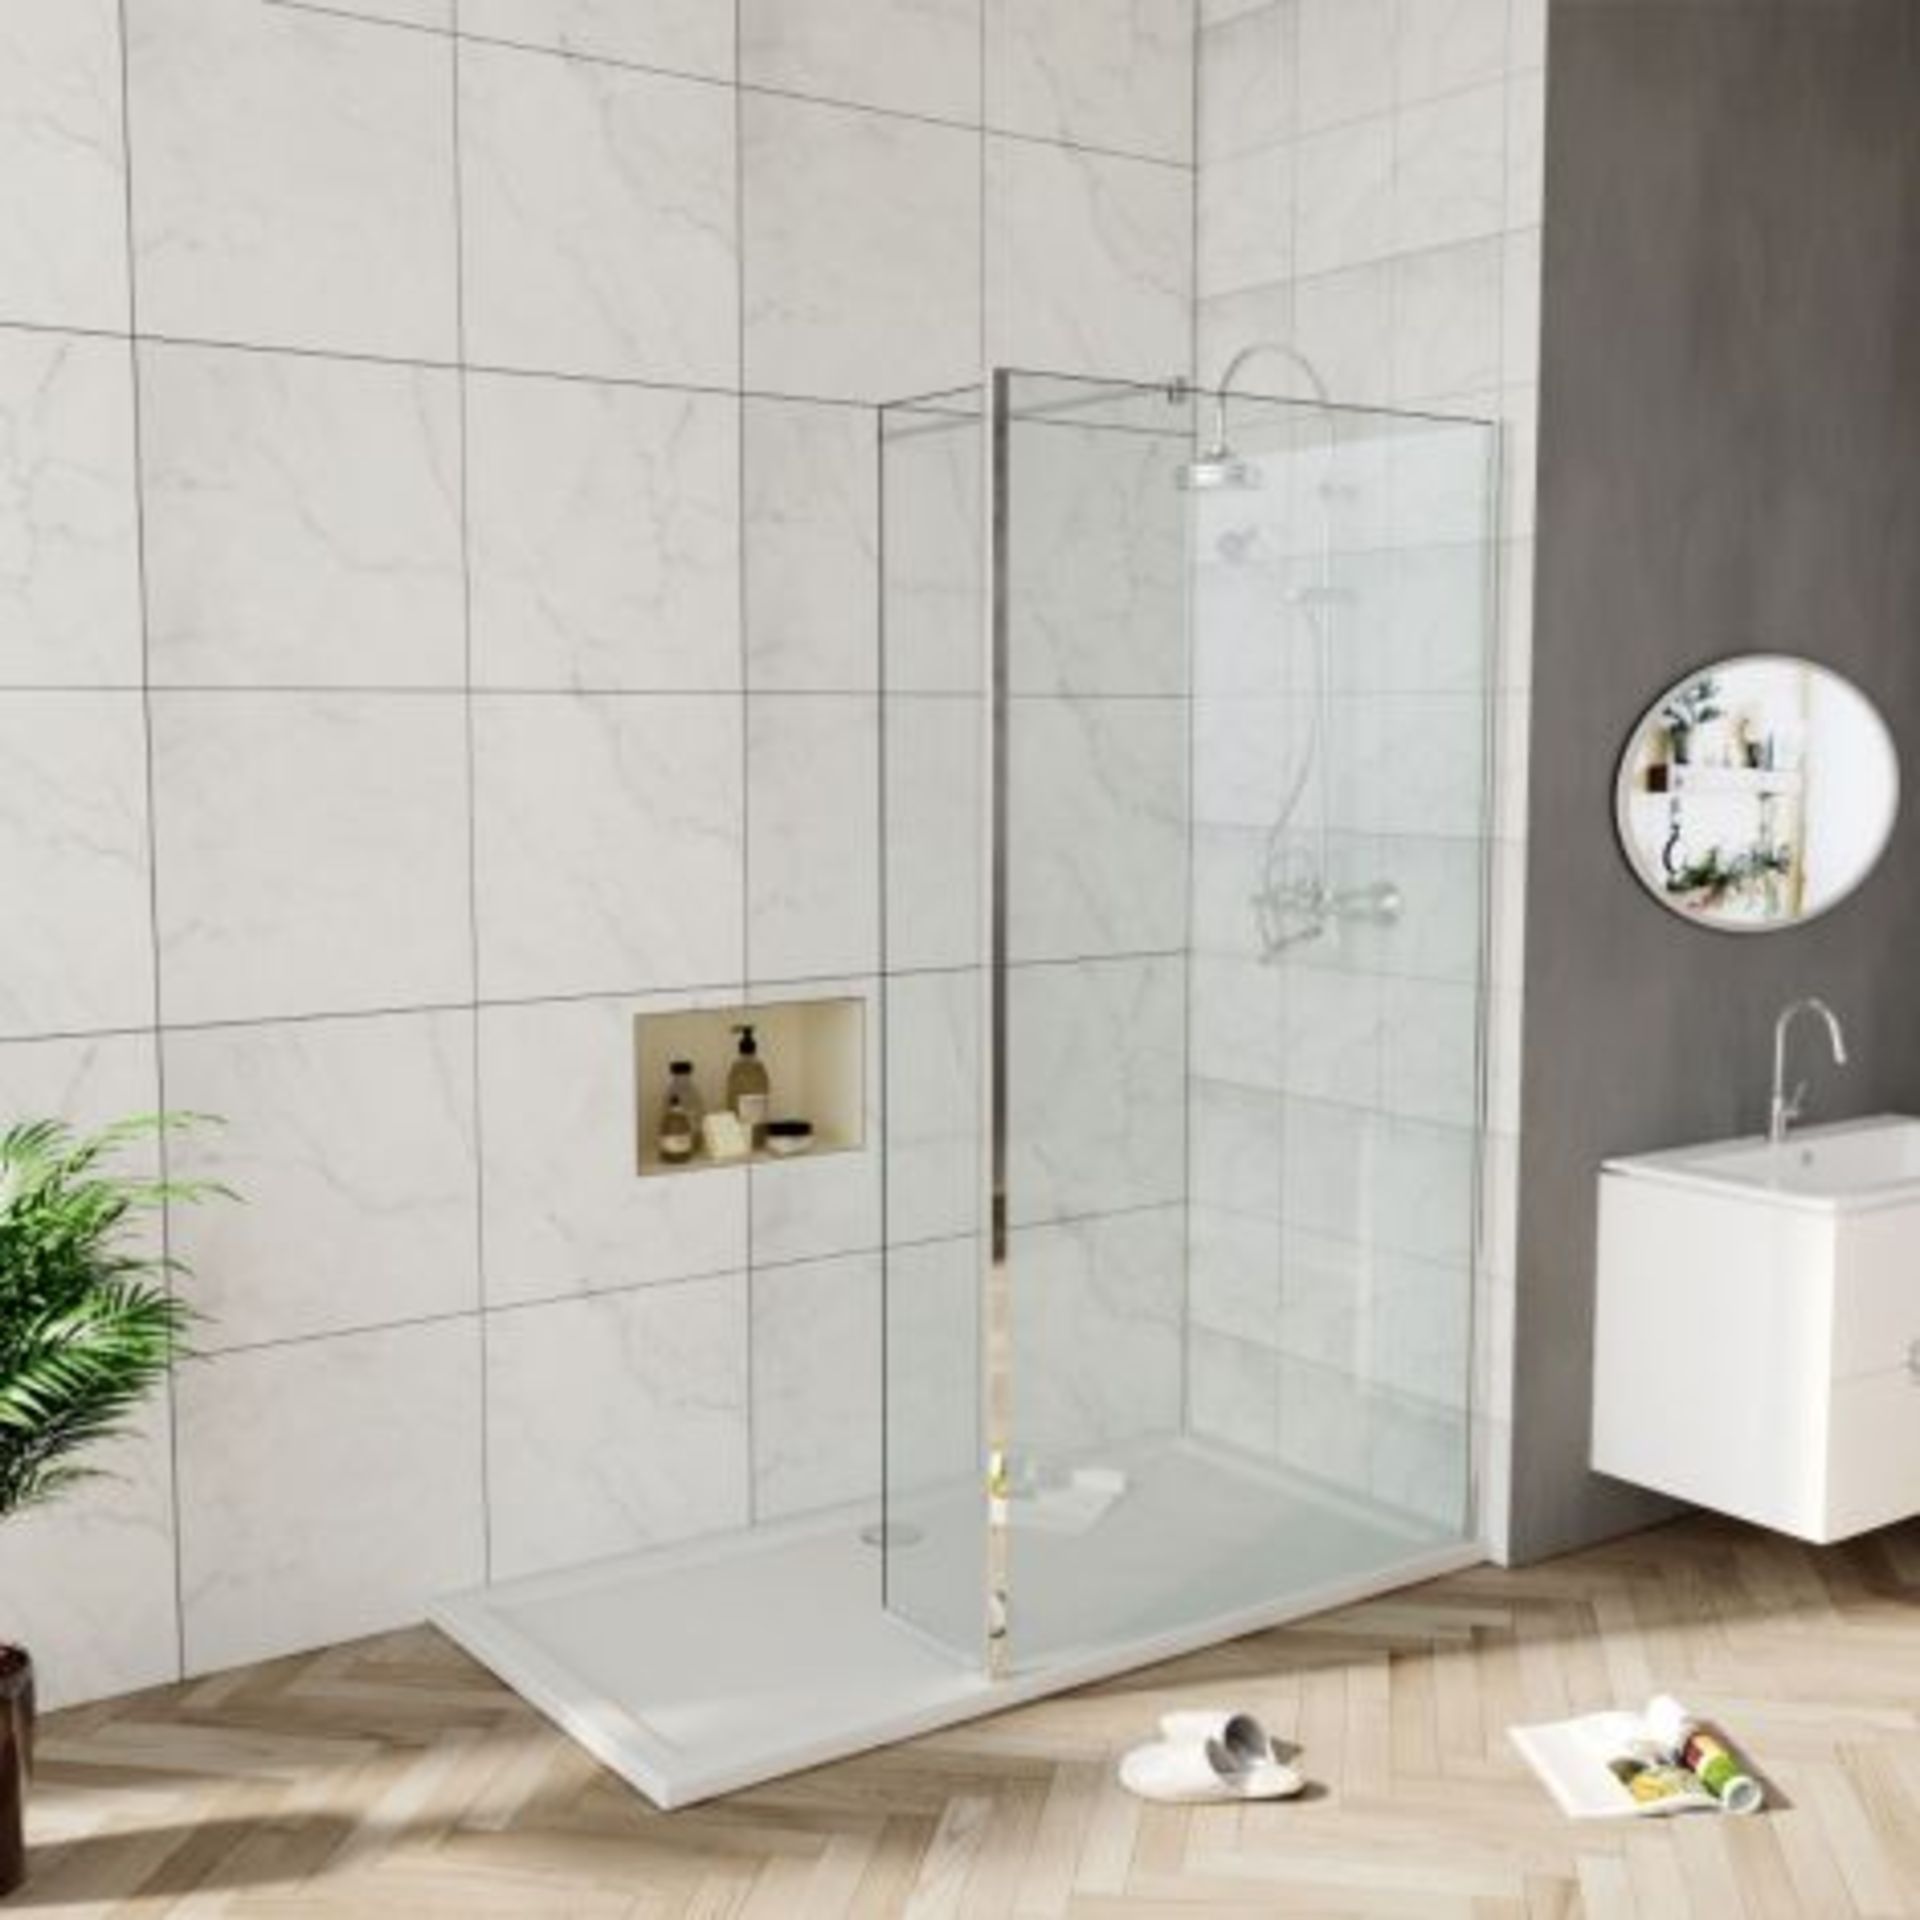 (SUP60) New 900x300mm - 8mm - Premium EasyClean Wetroom and rotatable panel.Rrp £399.99.8mm - Image 3 of 3